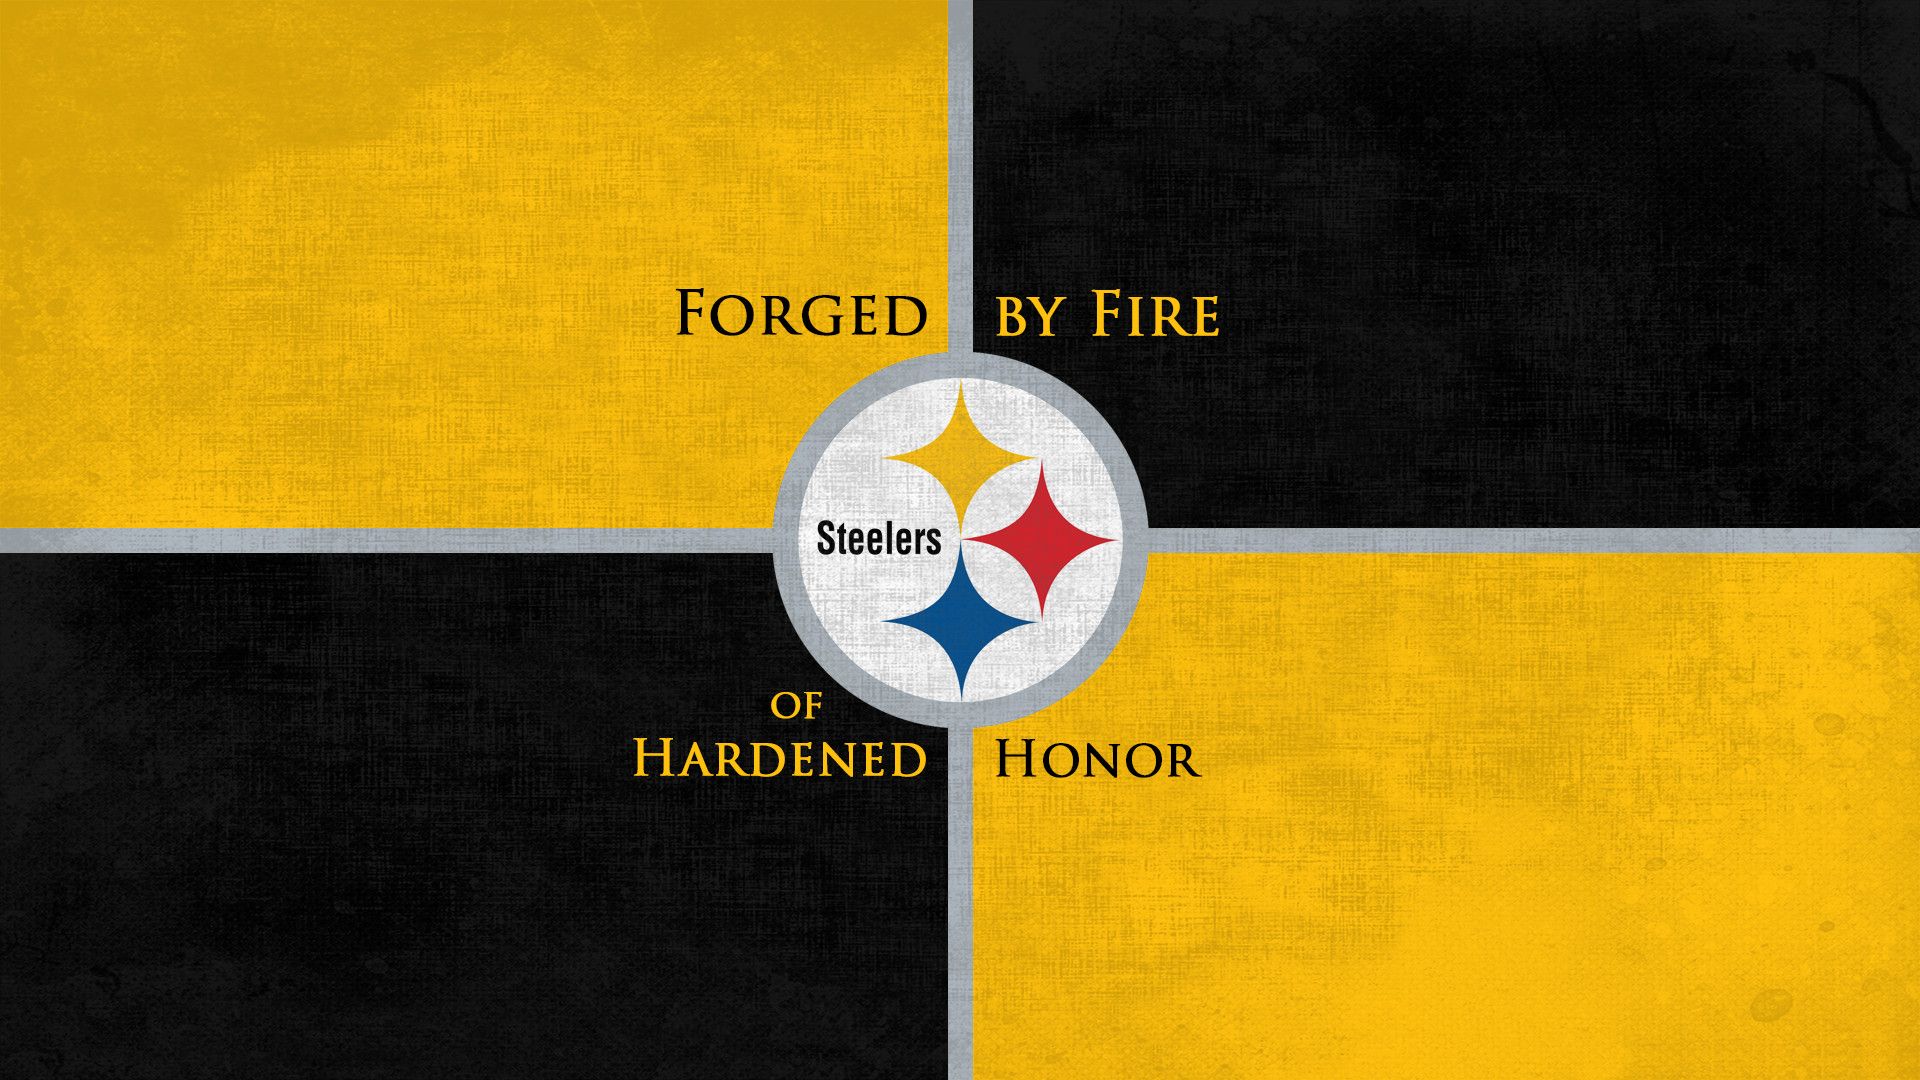 Anyone have a really good phone background? : steelers